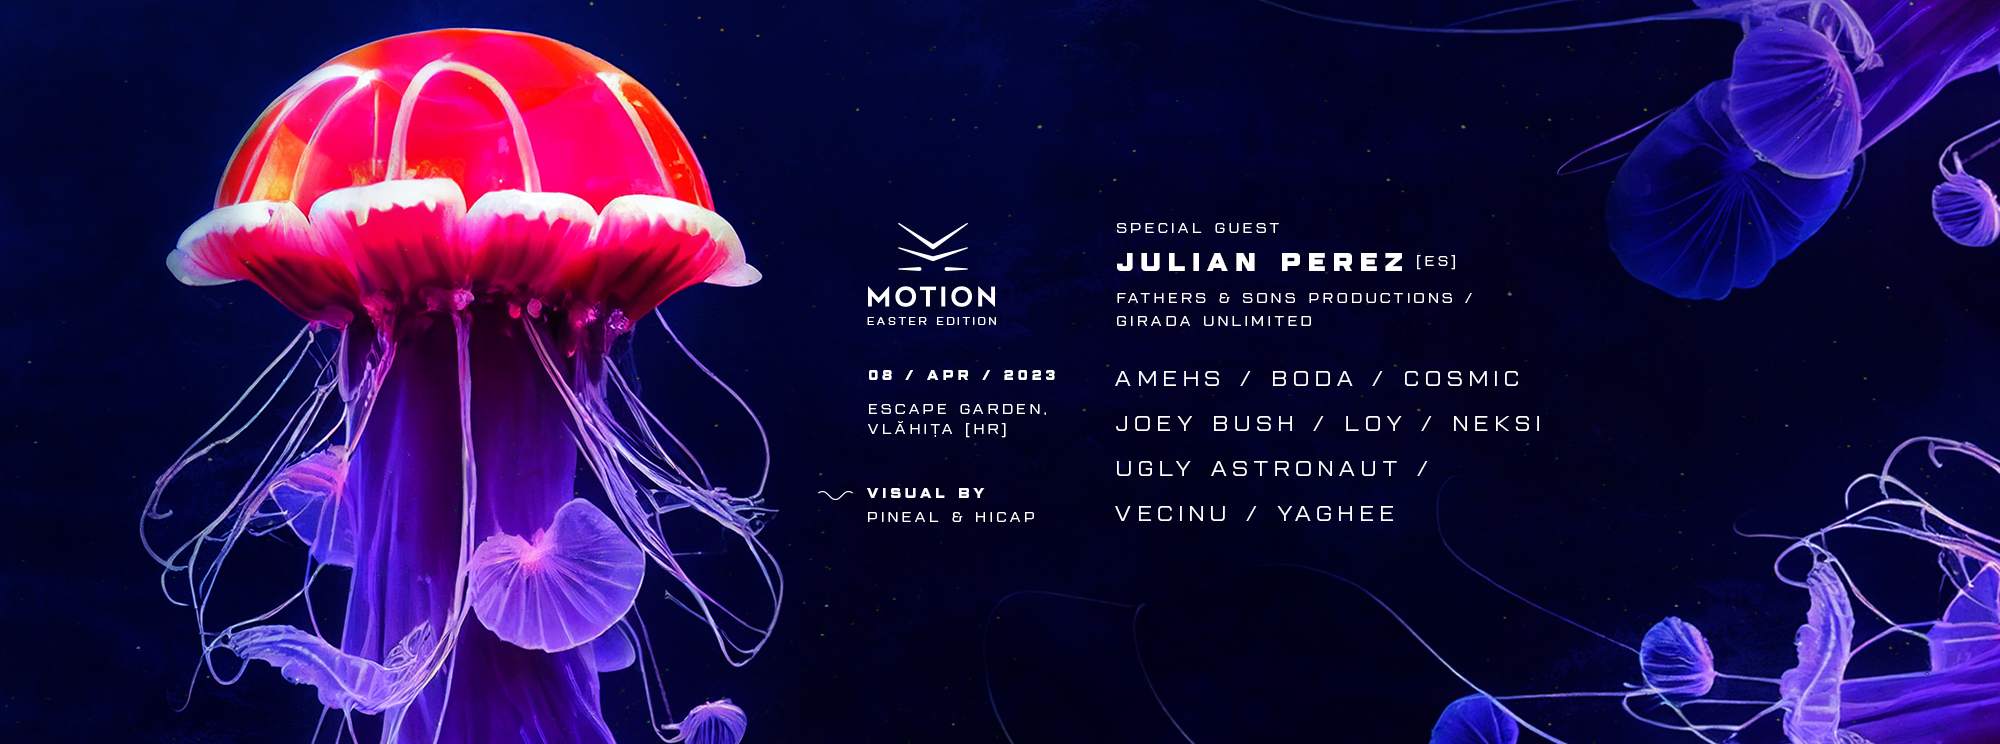 Motion Easter Edition with Julian Perez / LOy - フライヤー裏